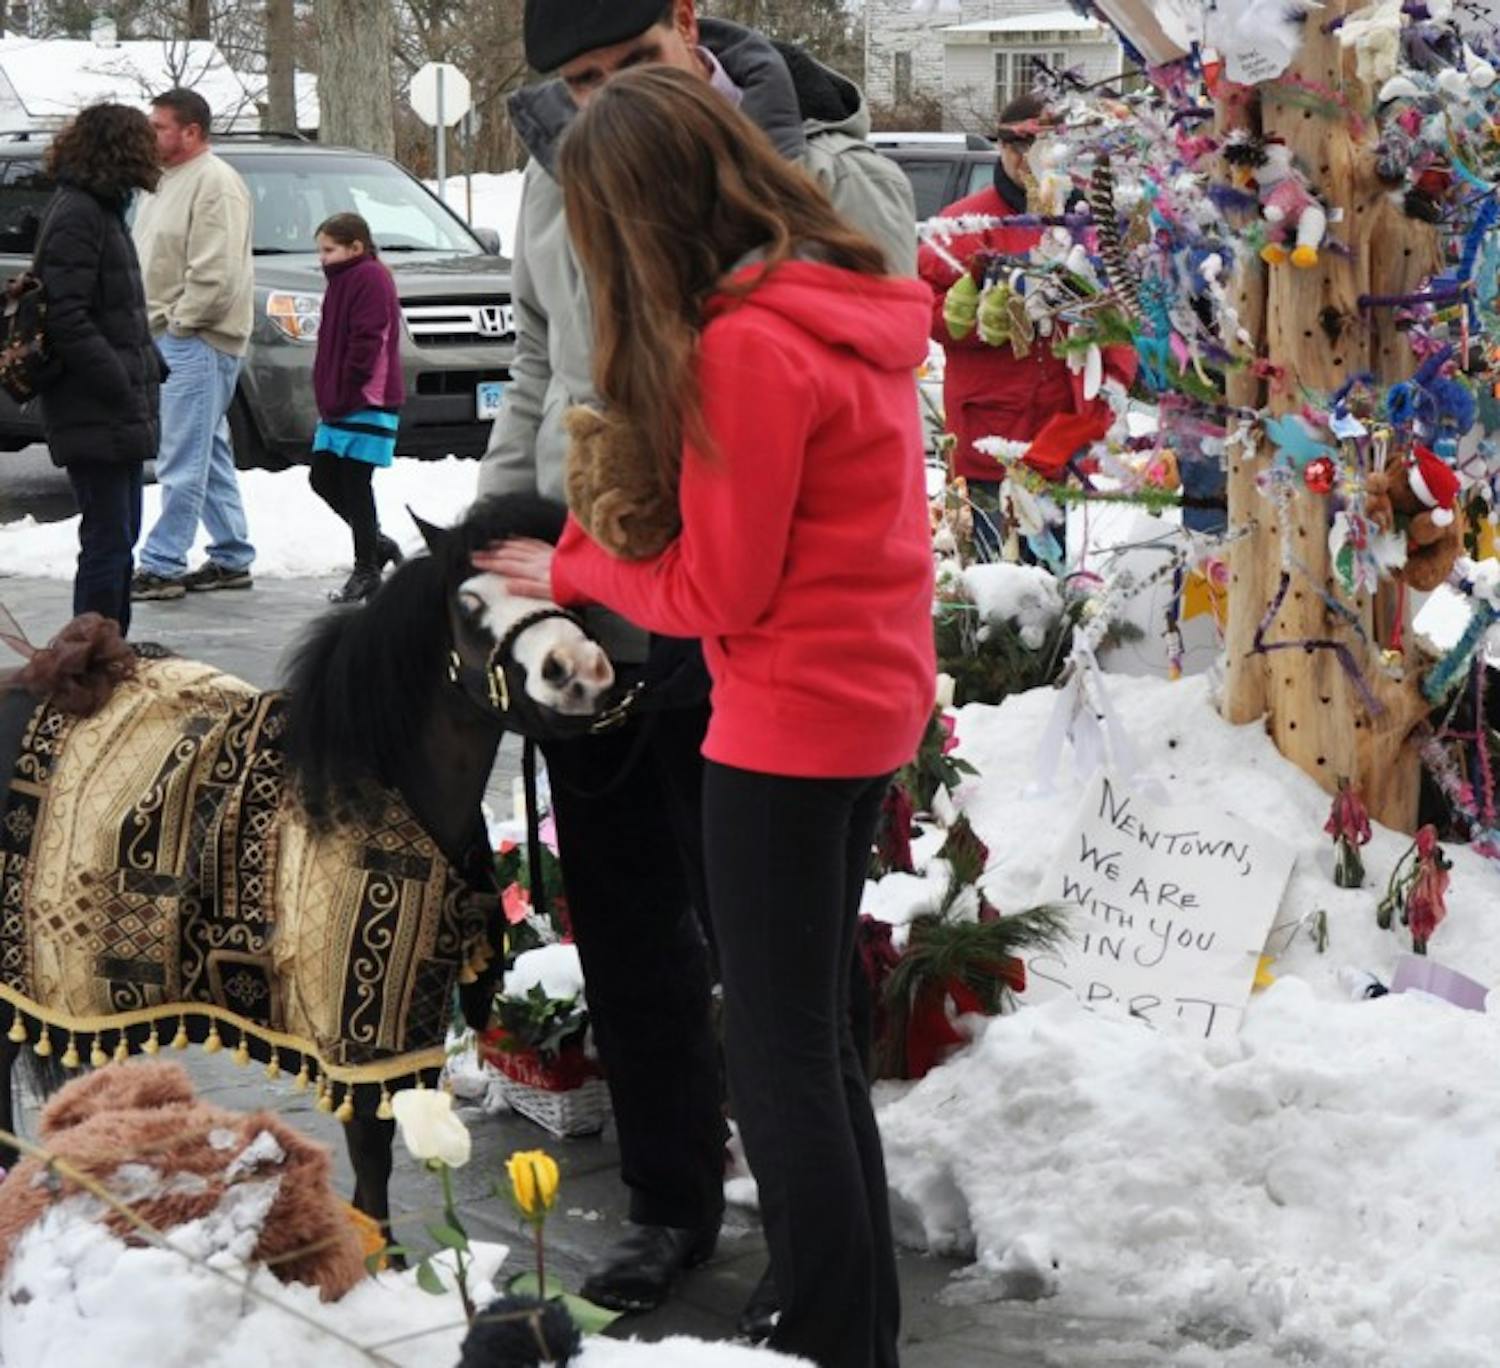 Magic, a Gentle Carousel mini horse of High Springs, comforts a Newtown, Conn., girl at a memorial site in the town. Gentle Carousel Miniature Therapy Horses is visiting the Newtown community to aid in the healing process.